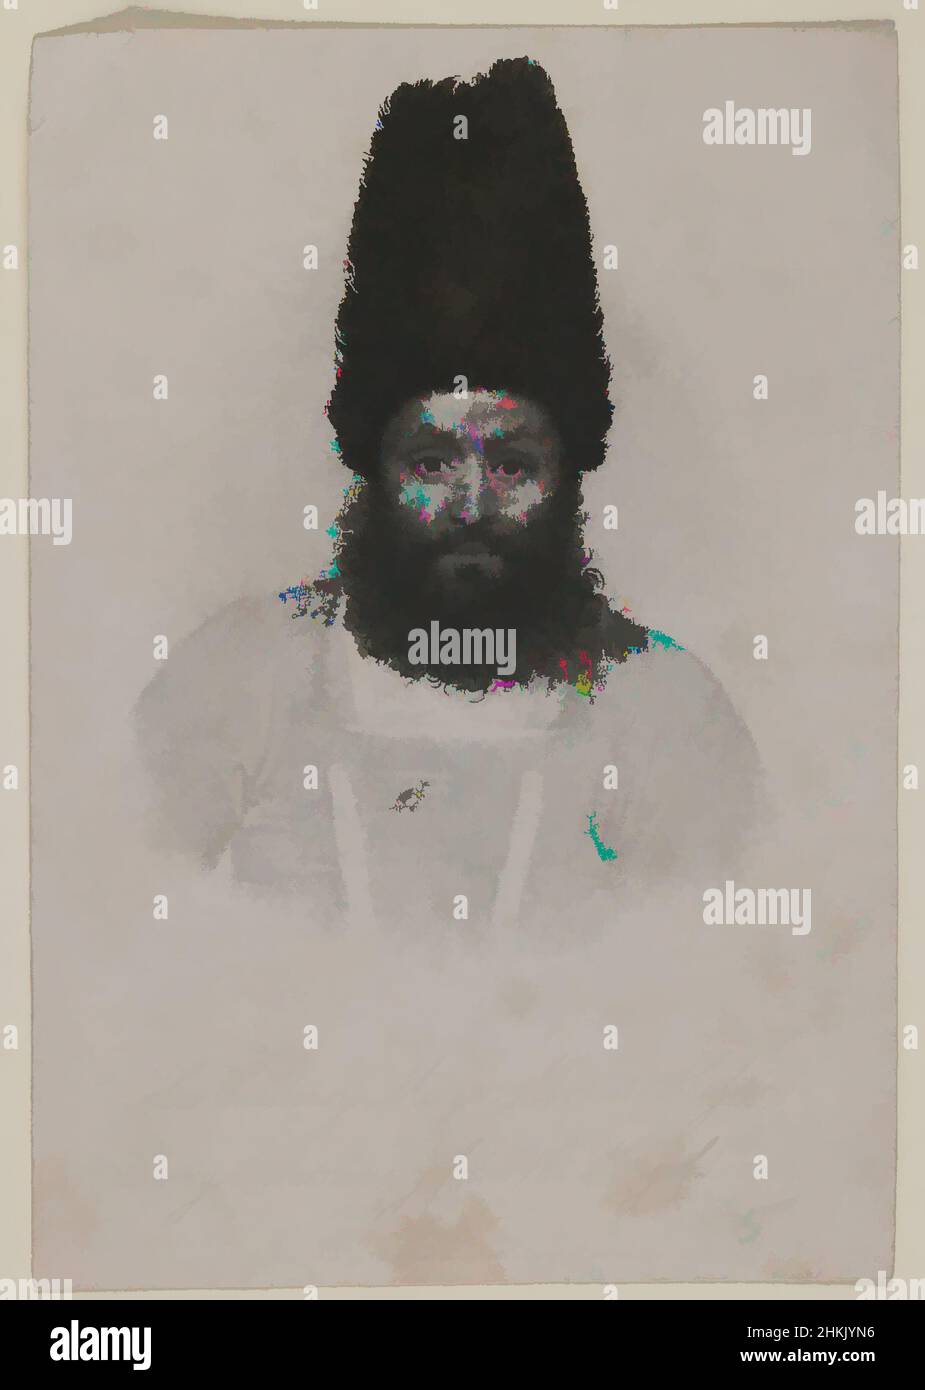 Art inspired by One of 274 Vintage Photographs, Printed ink on paper, late 19th-early 20th century, Qajar, Qajar Period, 5 1/2 x 3 15/16 in., 14 x 10 cm, beard, fez, hat, historical, iran, Iranian, persian, photograph, Classic works modernized by Artotop with a splash of modernity. Shapes, color and value, eye-catching visual impact on art. Emotions through freedom of artworks in a contemporary way. A timeless message pursuing a wildly creative new direction. Artists turning to the digital medium and creating the Artotop NFT Stock Photo